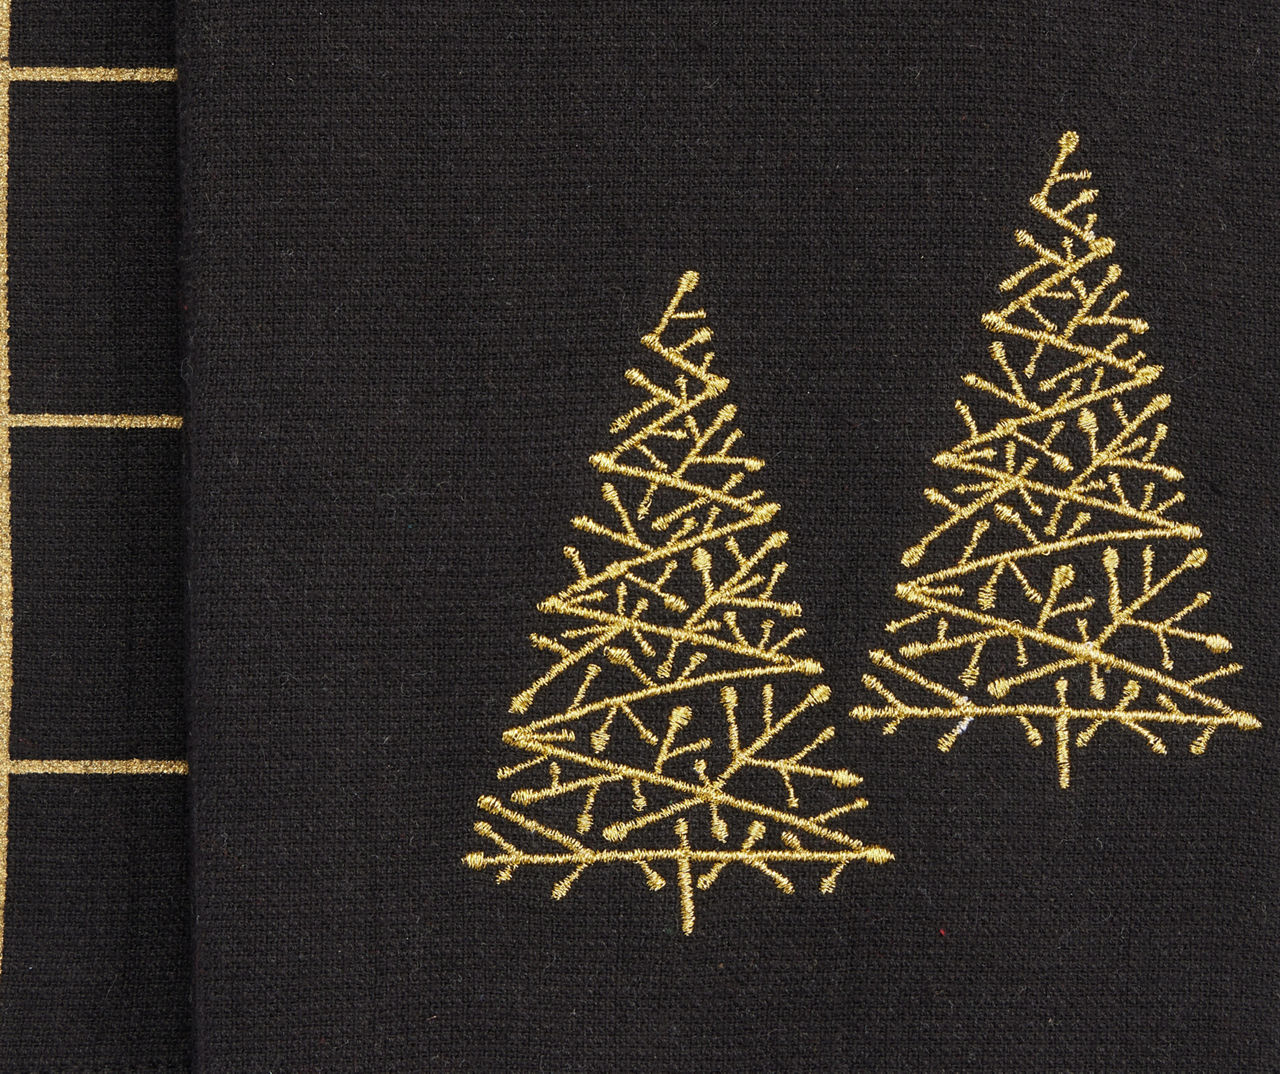 PACK OF SPARKLY CHRISTMAS KITCHEN TOWELS (PACK OF 2) - Gold